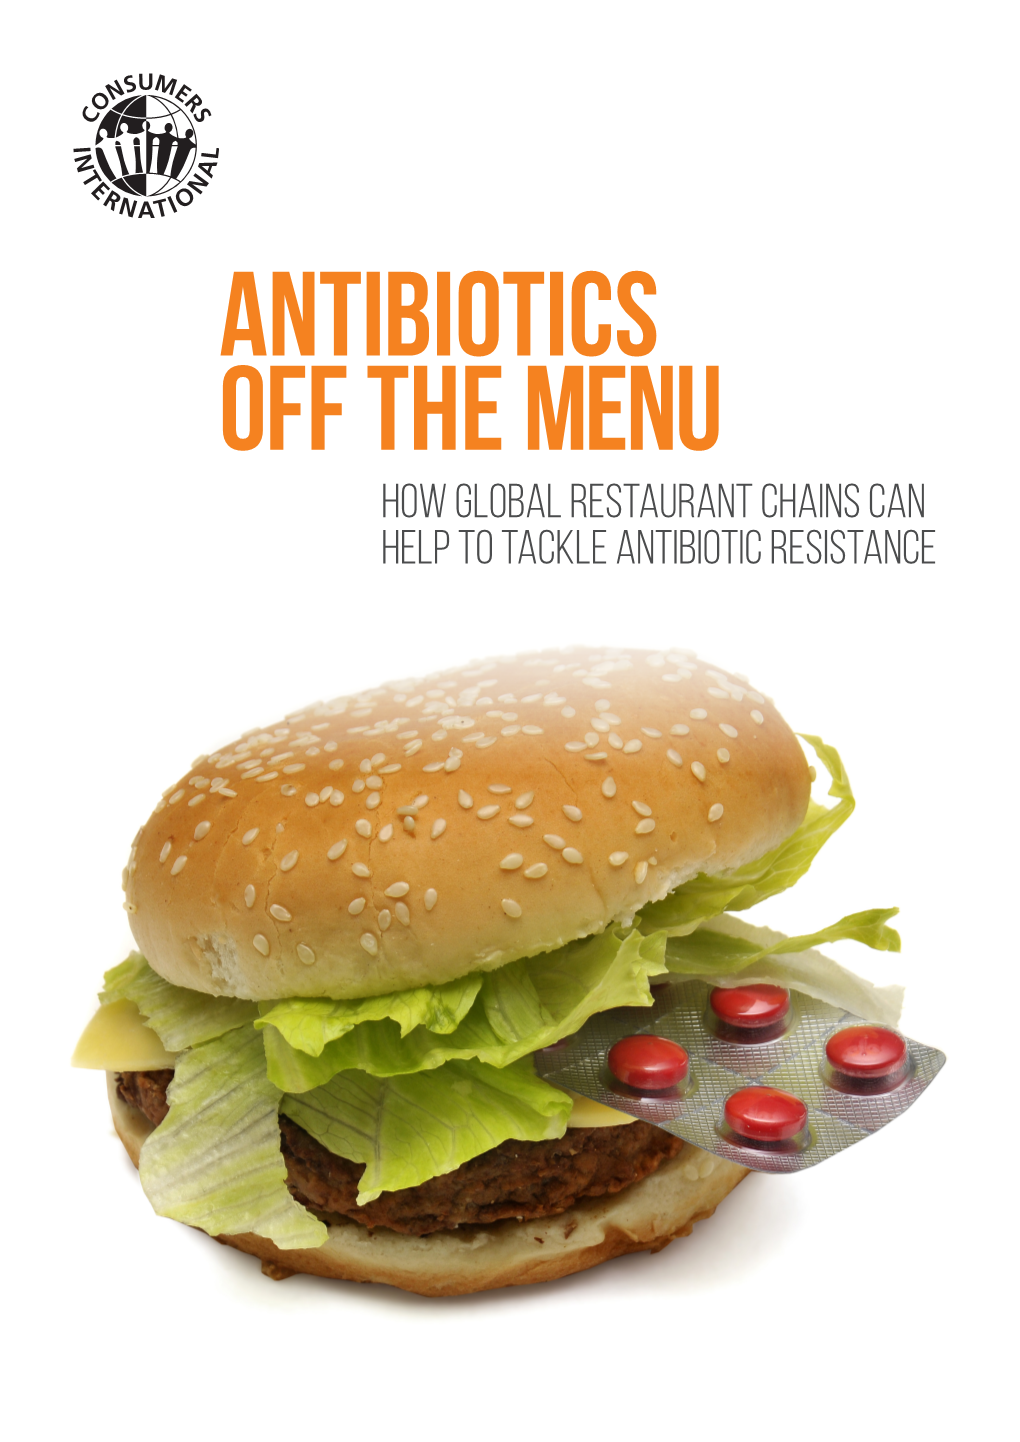 How Global Restaurant Chains Can Help to Tackle Antibiotic Resistance #Antibioticsoffthemenu Introduction